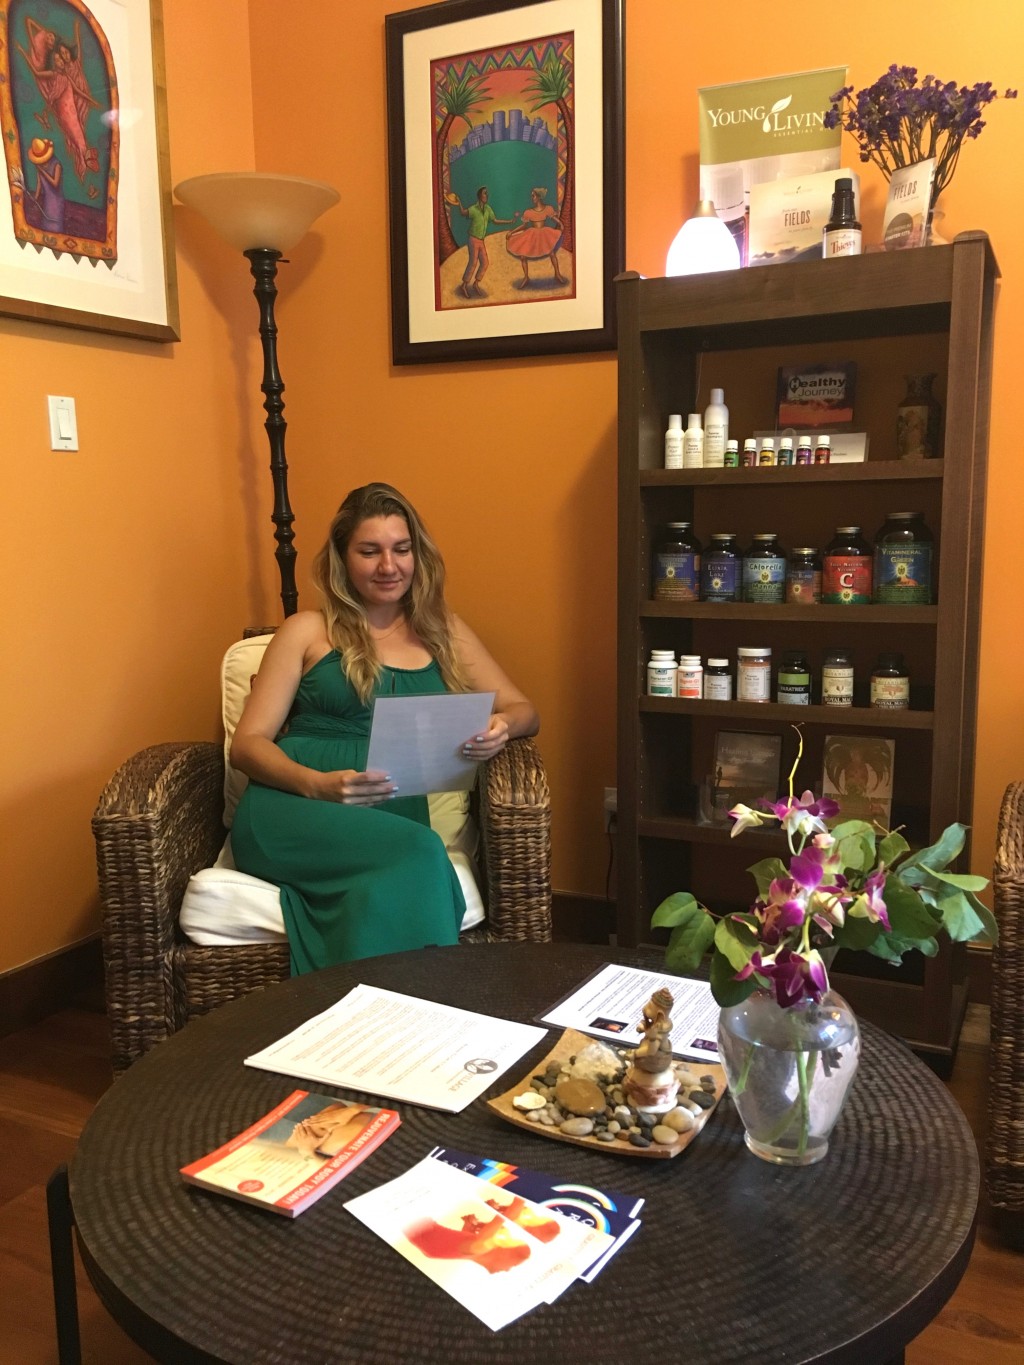 Gravity East Village Is A Wellness Center In Nyc Specializing Colon Hydrotherapy Sessions We Take Practical Approach To Cleansing